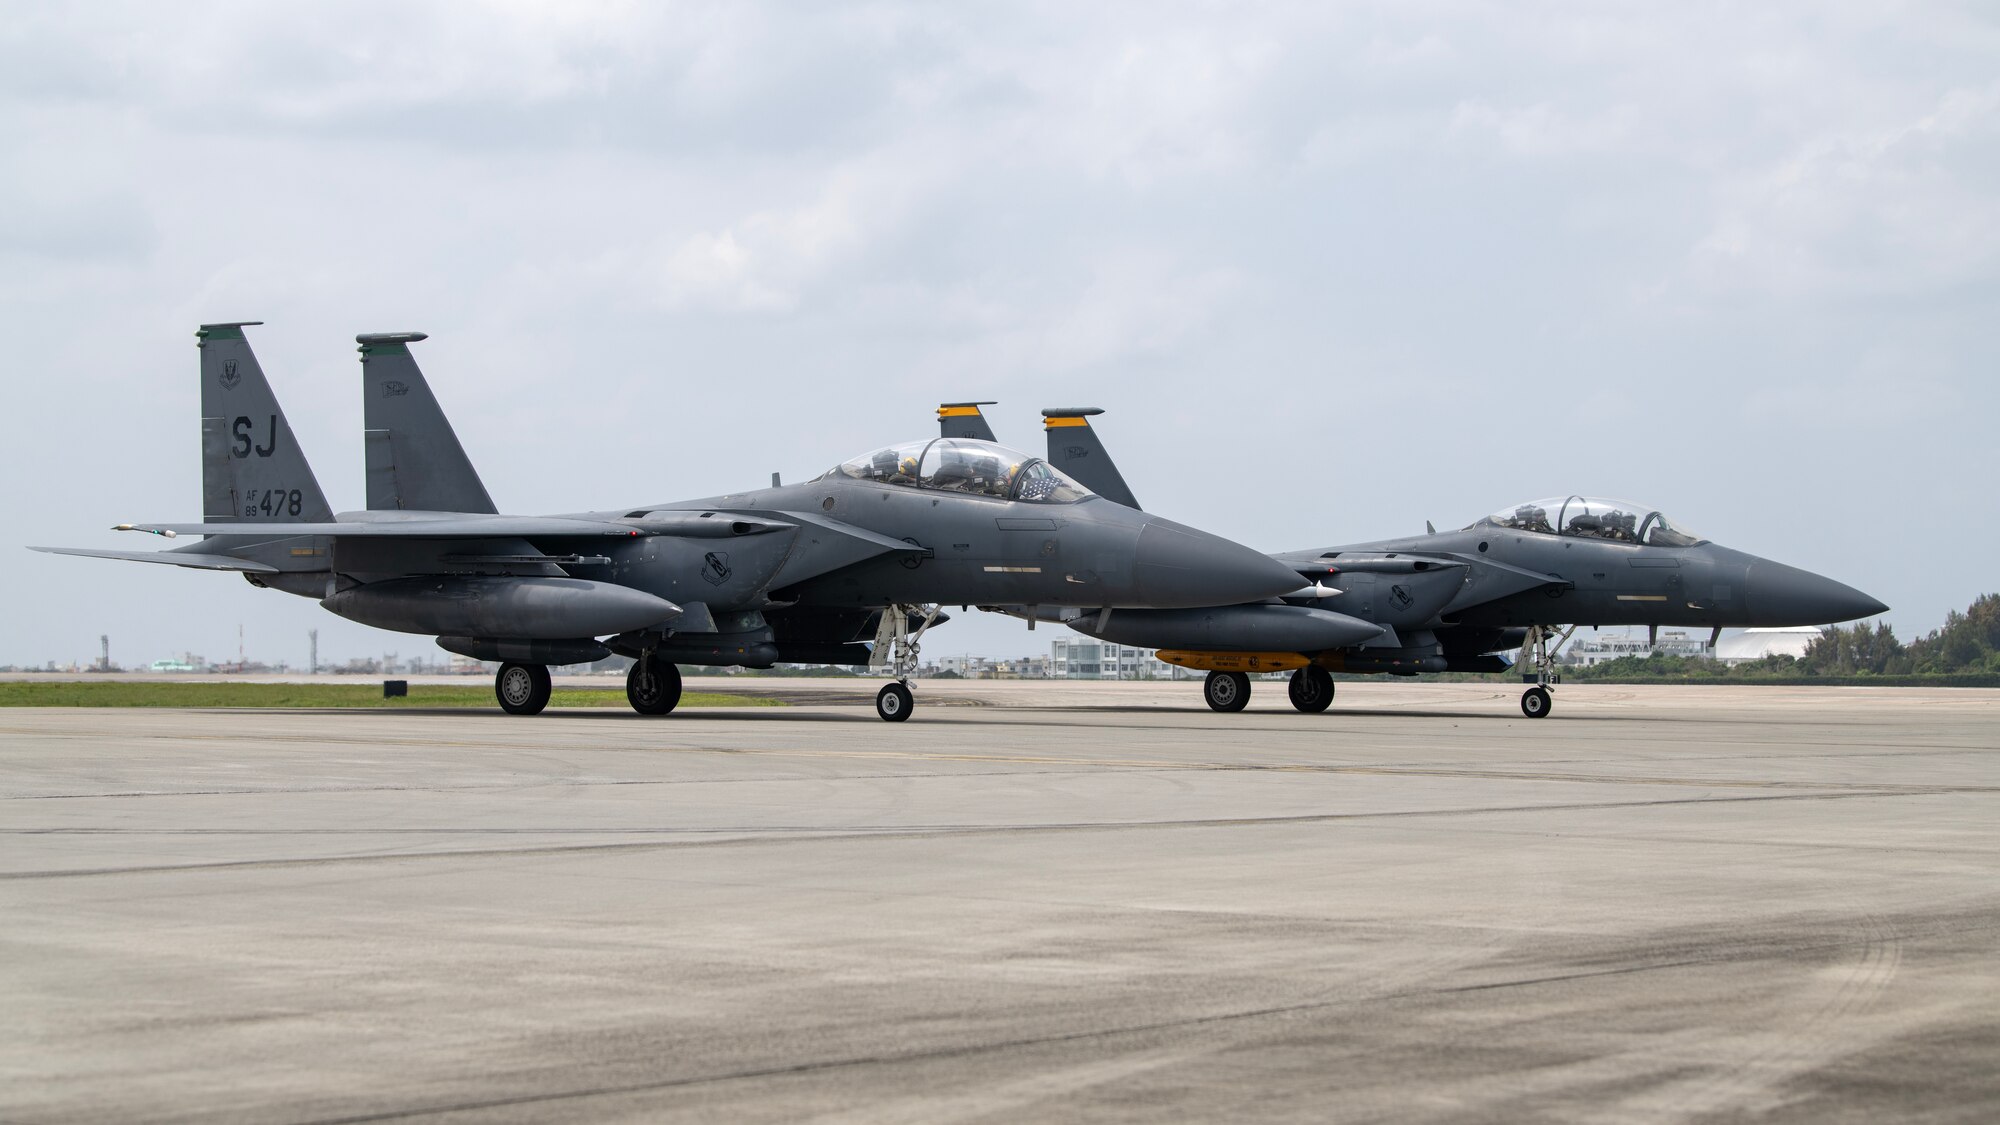 F-15E Strike Eagles assigned to the 336th Fighter Squadron arrive at Kadena Air Base, Japan, April 8, 2023. The Strike Eagles arrived from Seymour Johnson Air Force Base, North Carolina, to ensure continuous fighter presence through the phased return of Kadena’s fleet of F-15C/D Eagles to the United States. (U.S. Air Force photo by Senior Airman Jessi Roth)